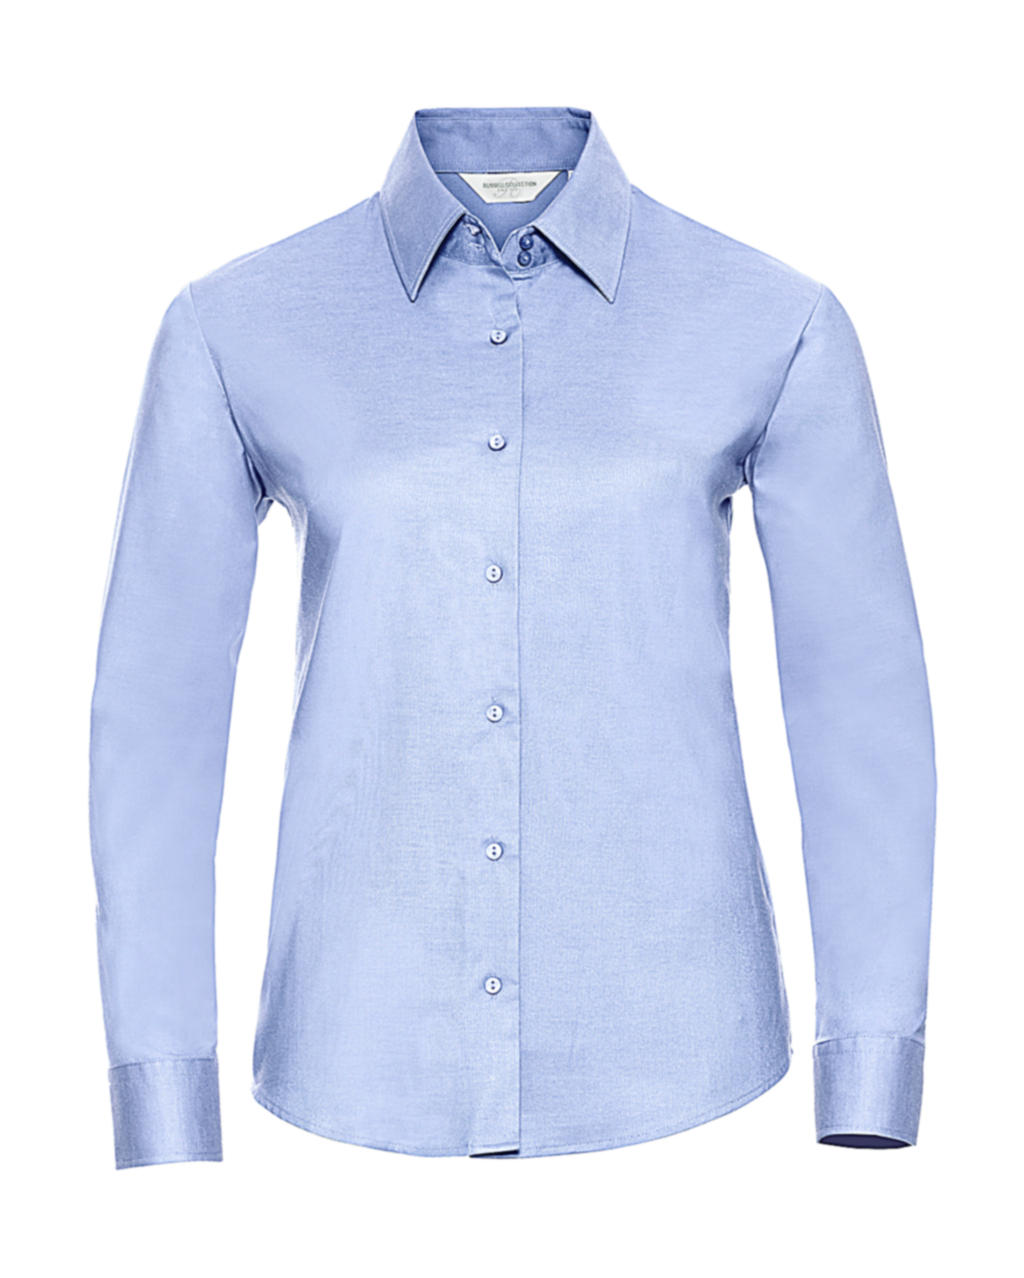  Ladies Classic Oxford Shirt LS in Farbe Oxford Blue